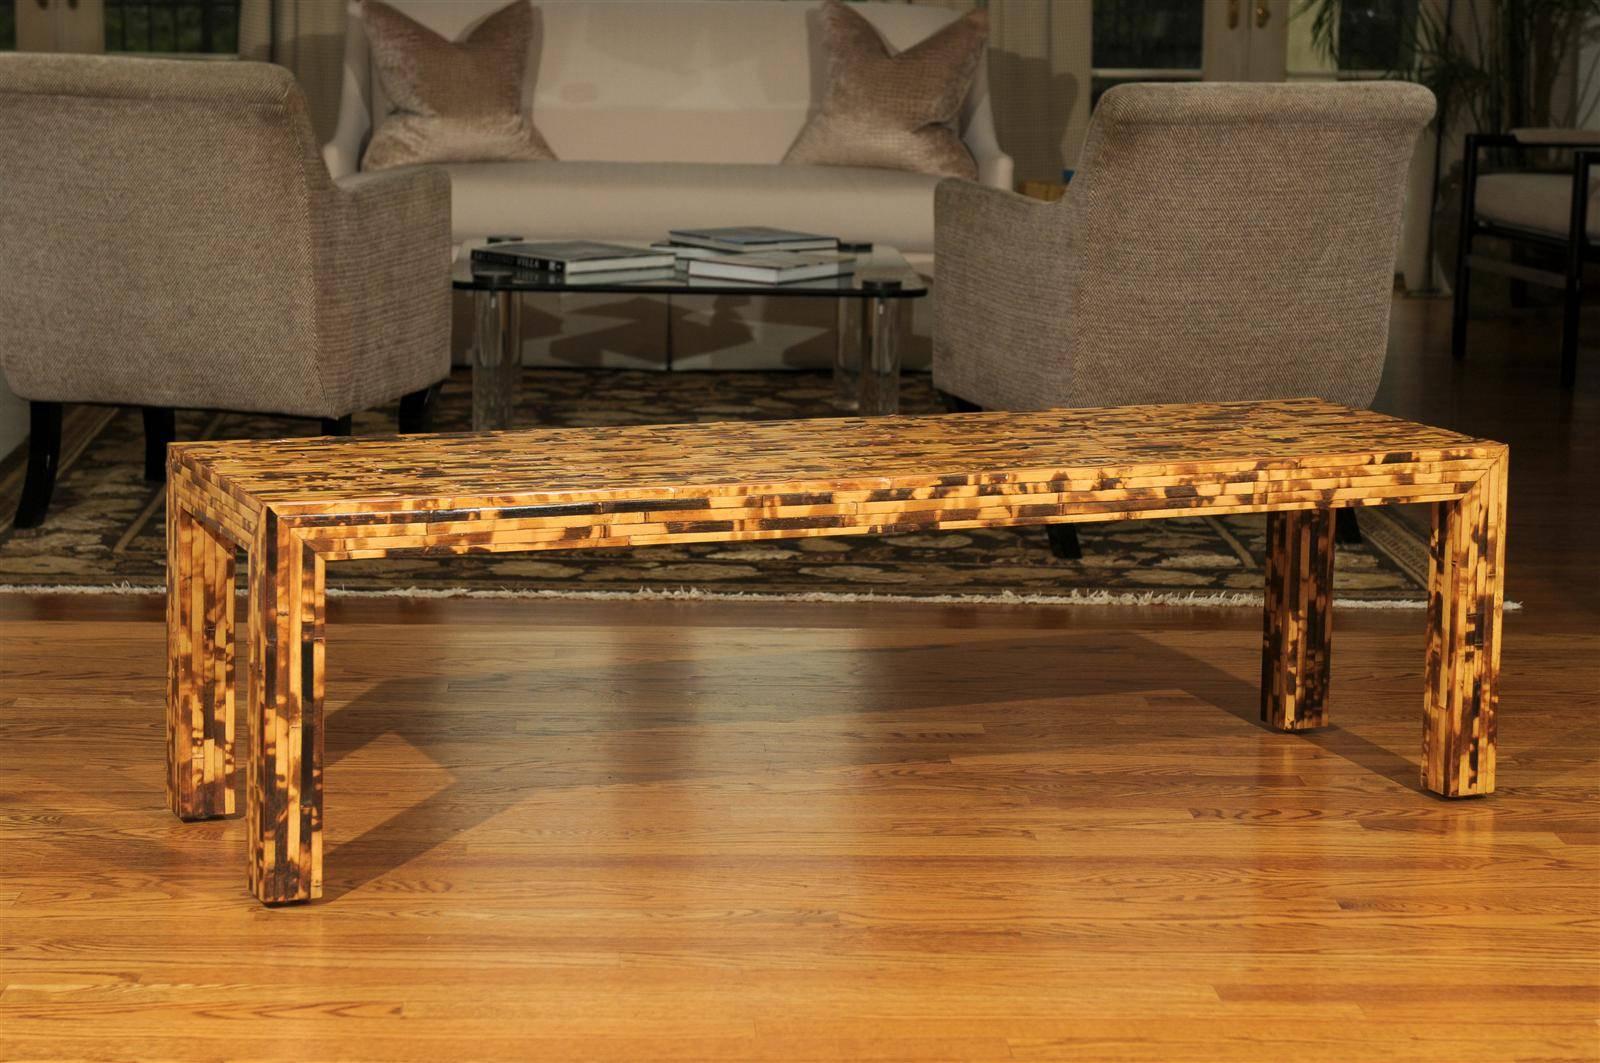 An outstanding custom-made vintage coffee table or bench, circa 1970. Stout hardwood form veneered in pieces of bamboo. Beautiful quality and workmanship. The range of color in the bamboo creates a tortoise shell effect.  Exquisite jewelry!